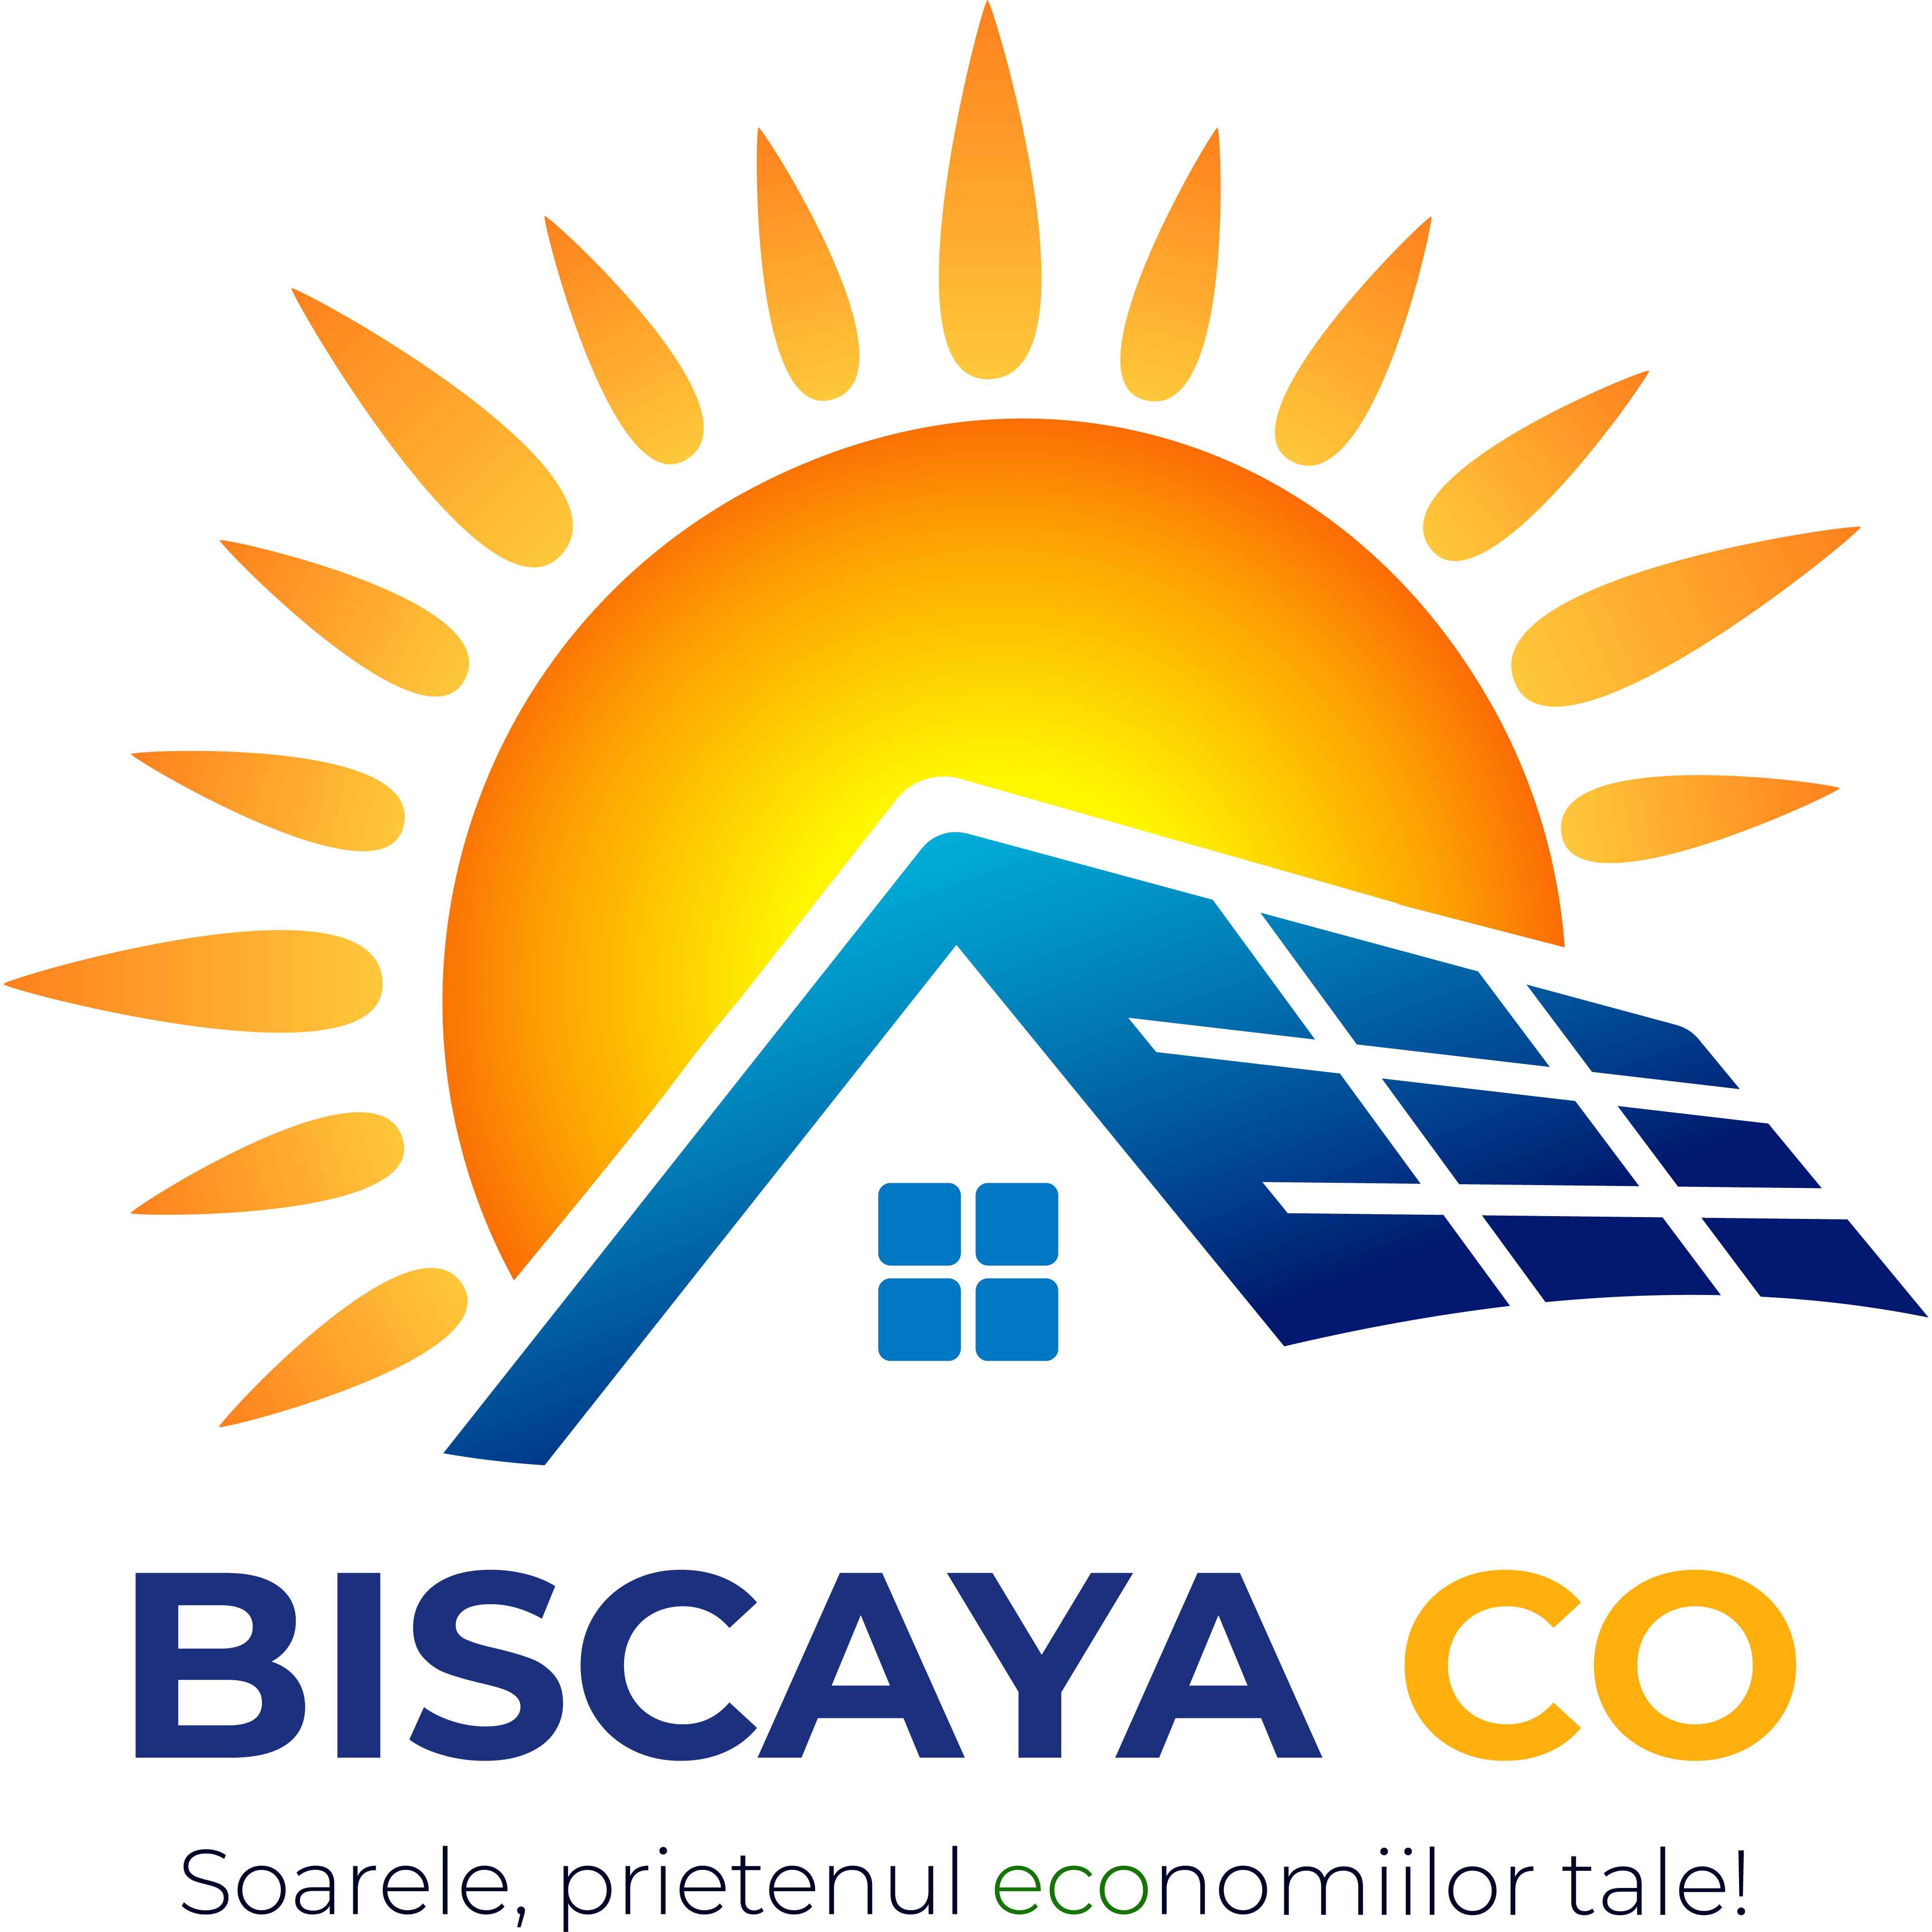 BISCAYA CO